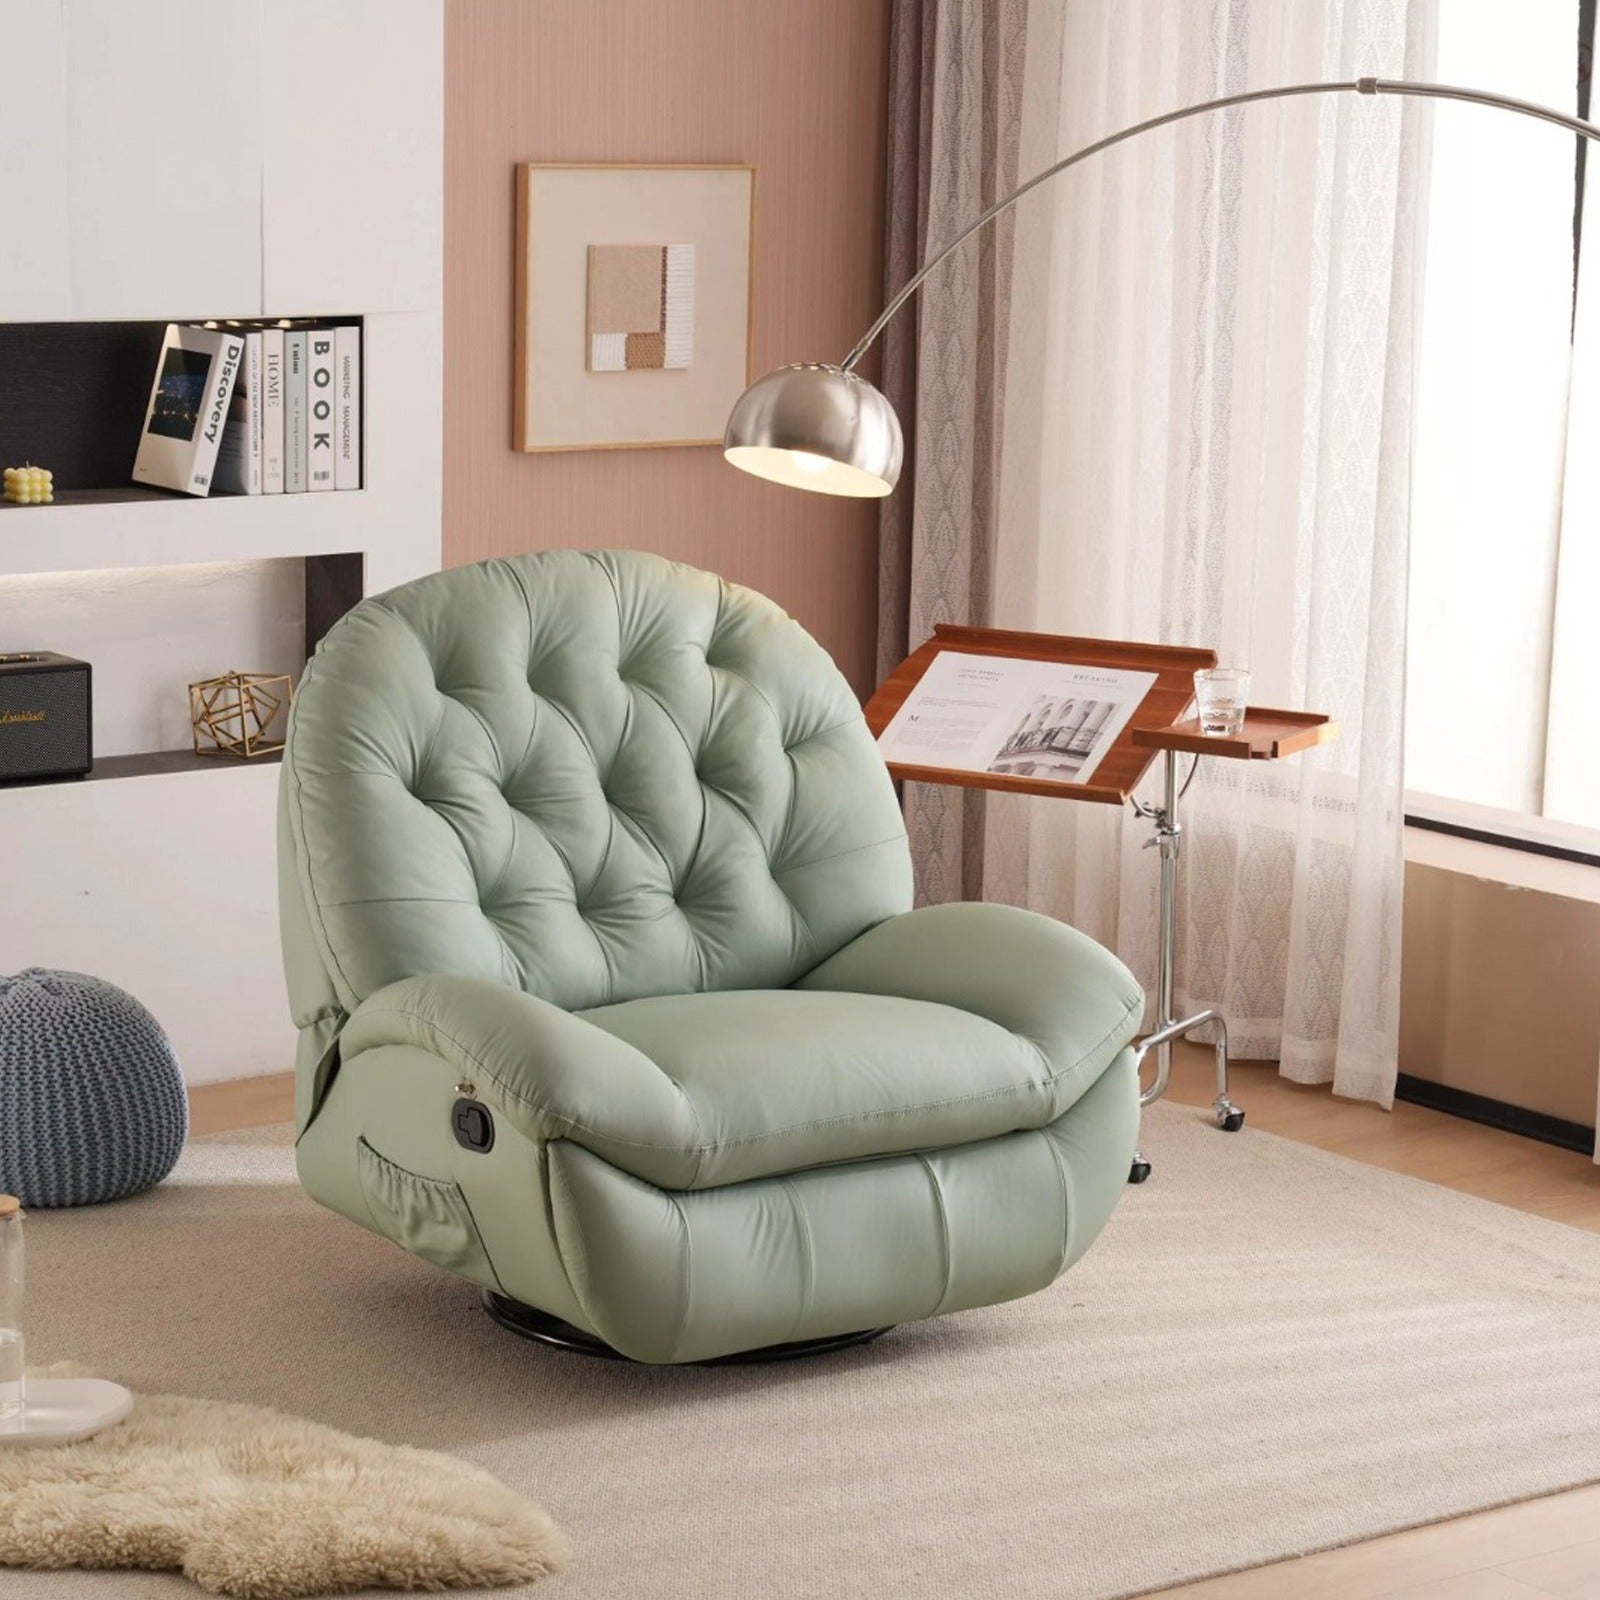 Adjustable Single Sofa Recliner situated in a living room of a house 